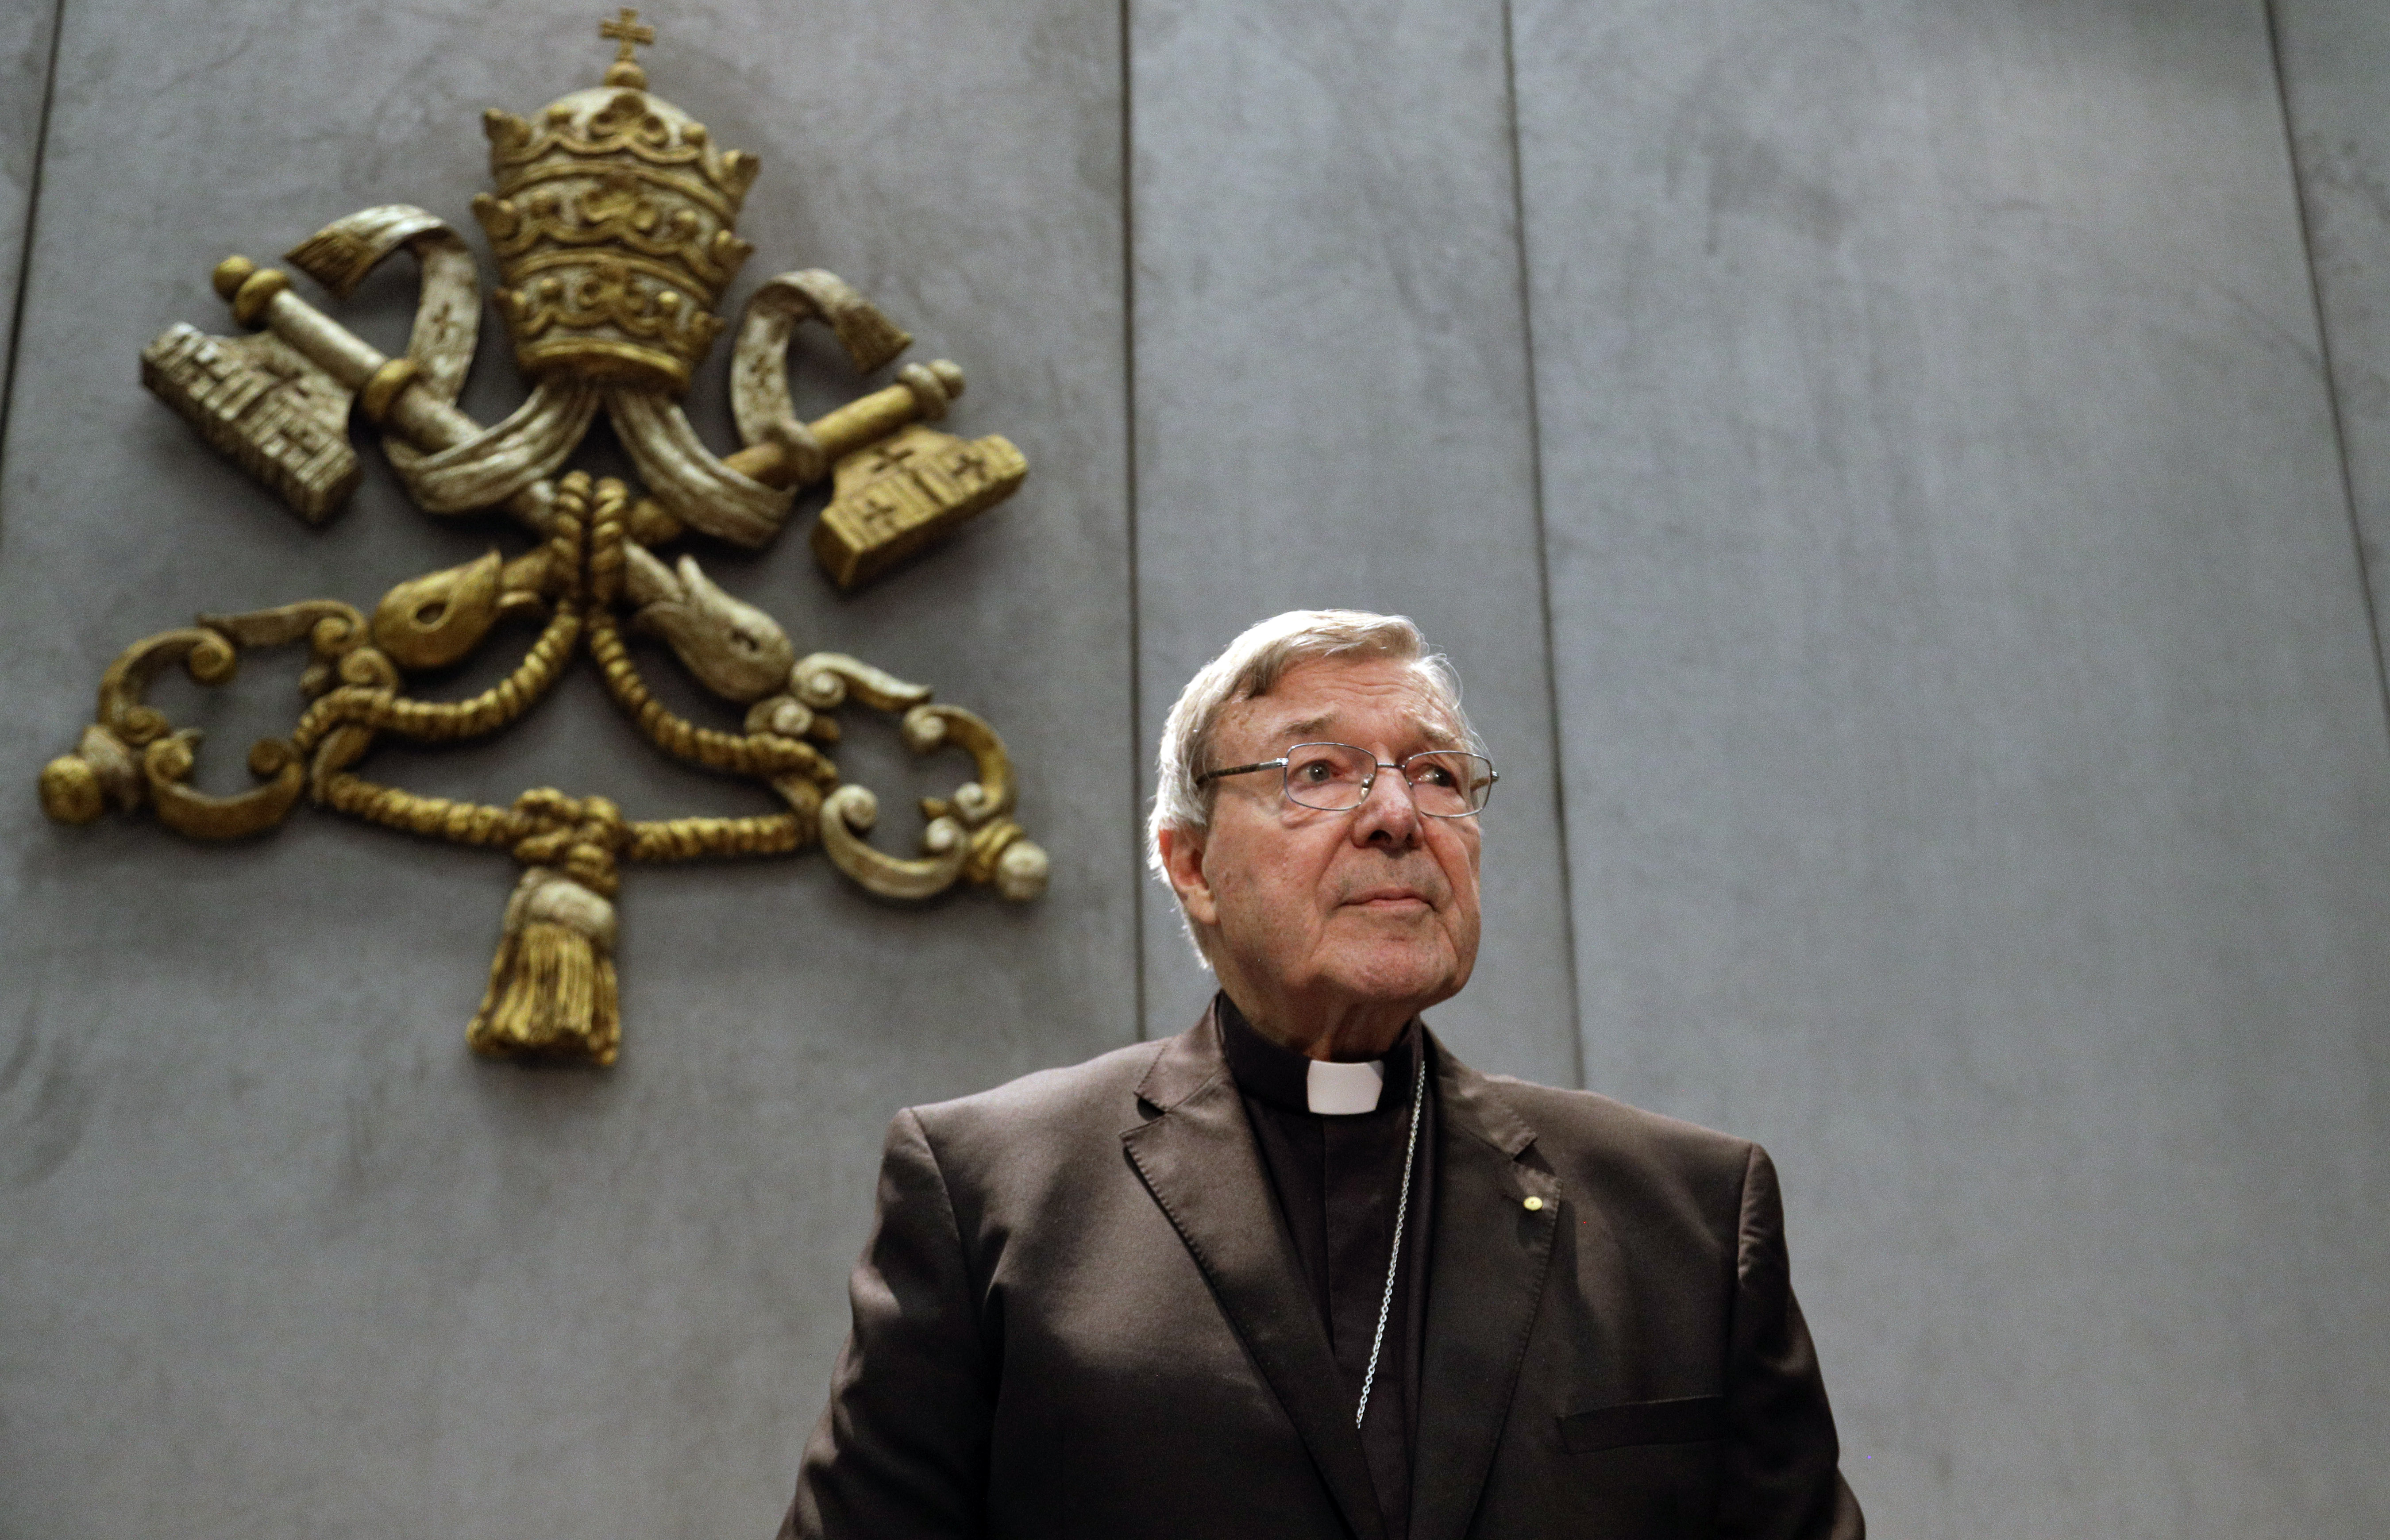 In this June 29, 2017, file photo, Cardinal George Pell prepares to make a statement, at the Vatican. (AP Photo/Gregorio Borgia, File)